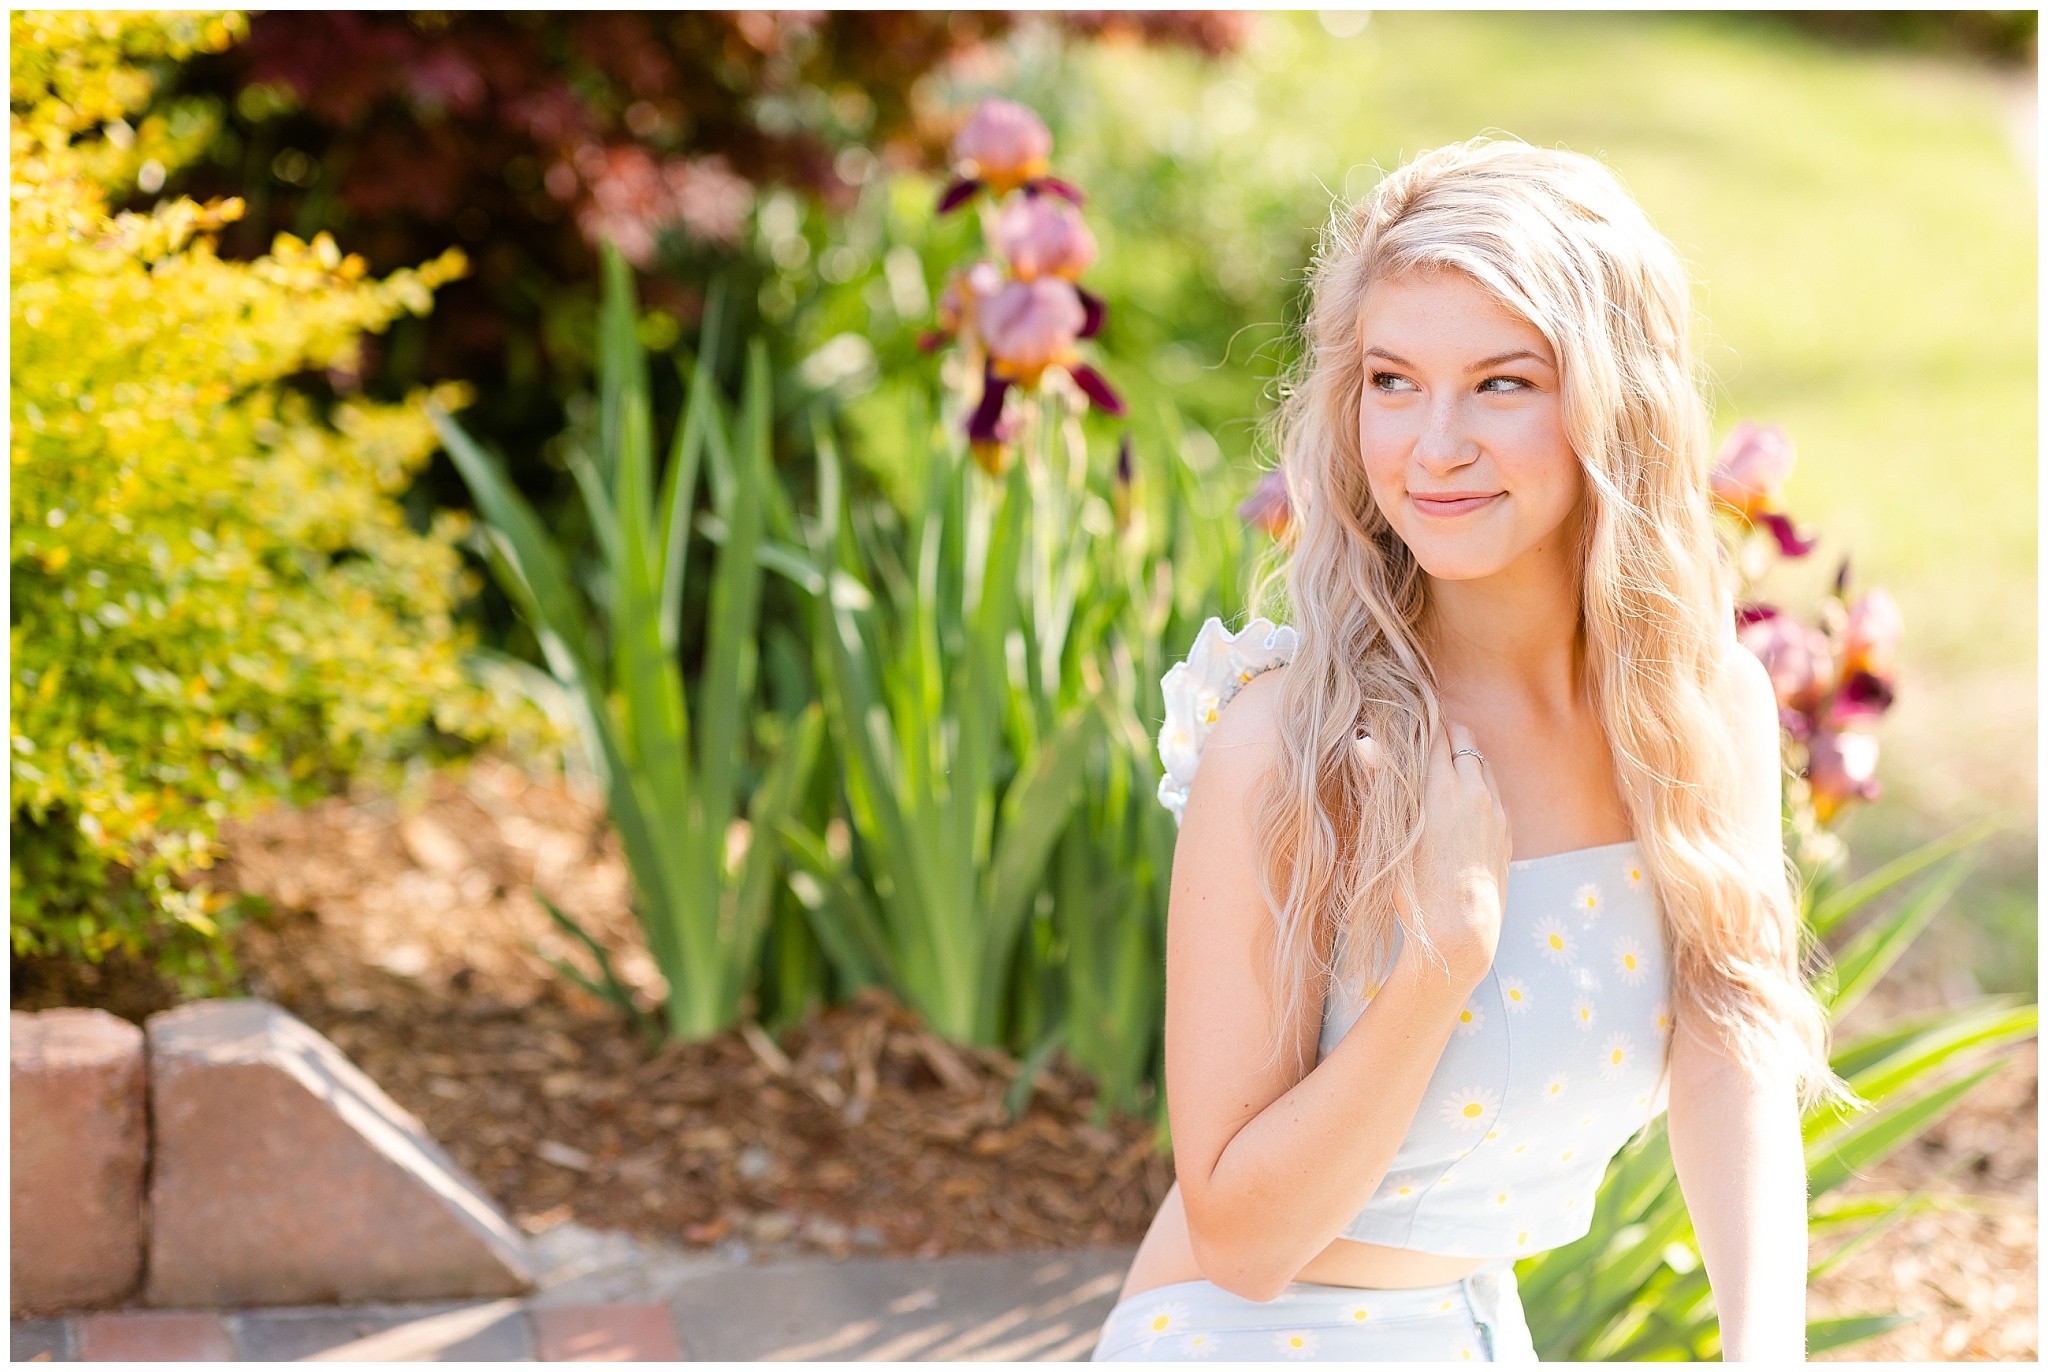 Senior session at the Wilson Botanical Gardens with Casey W. Childers Photography.